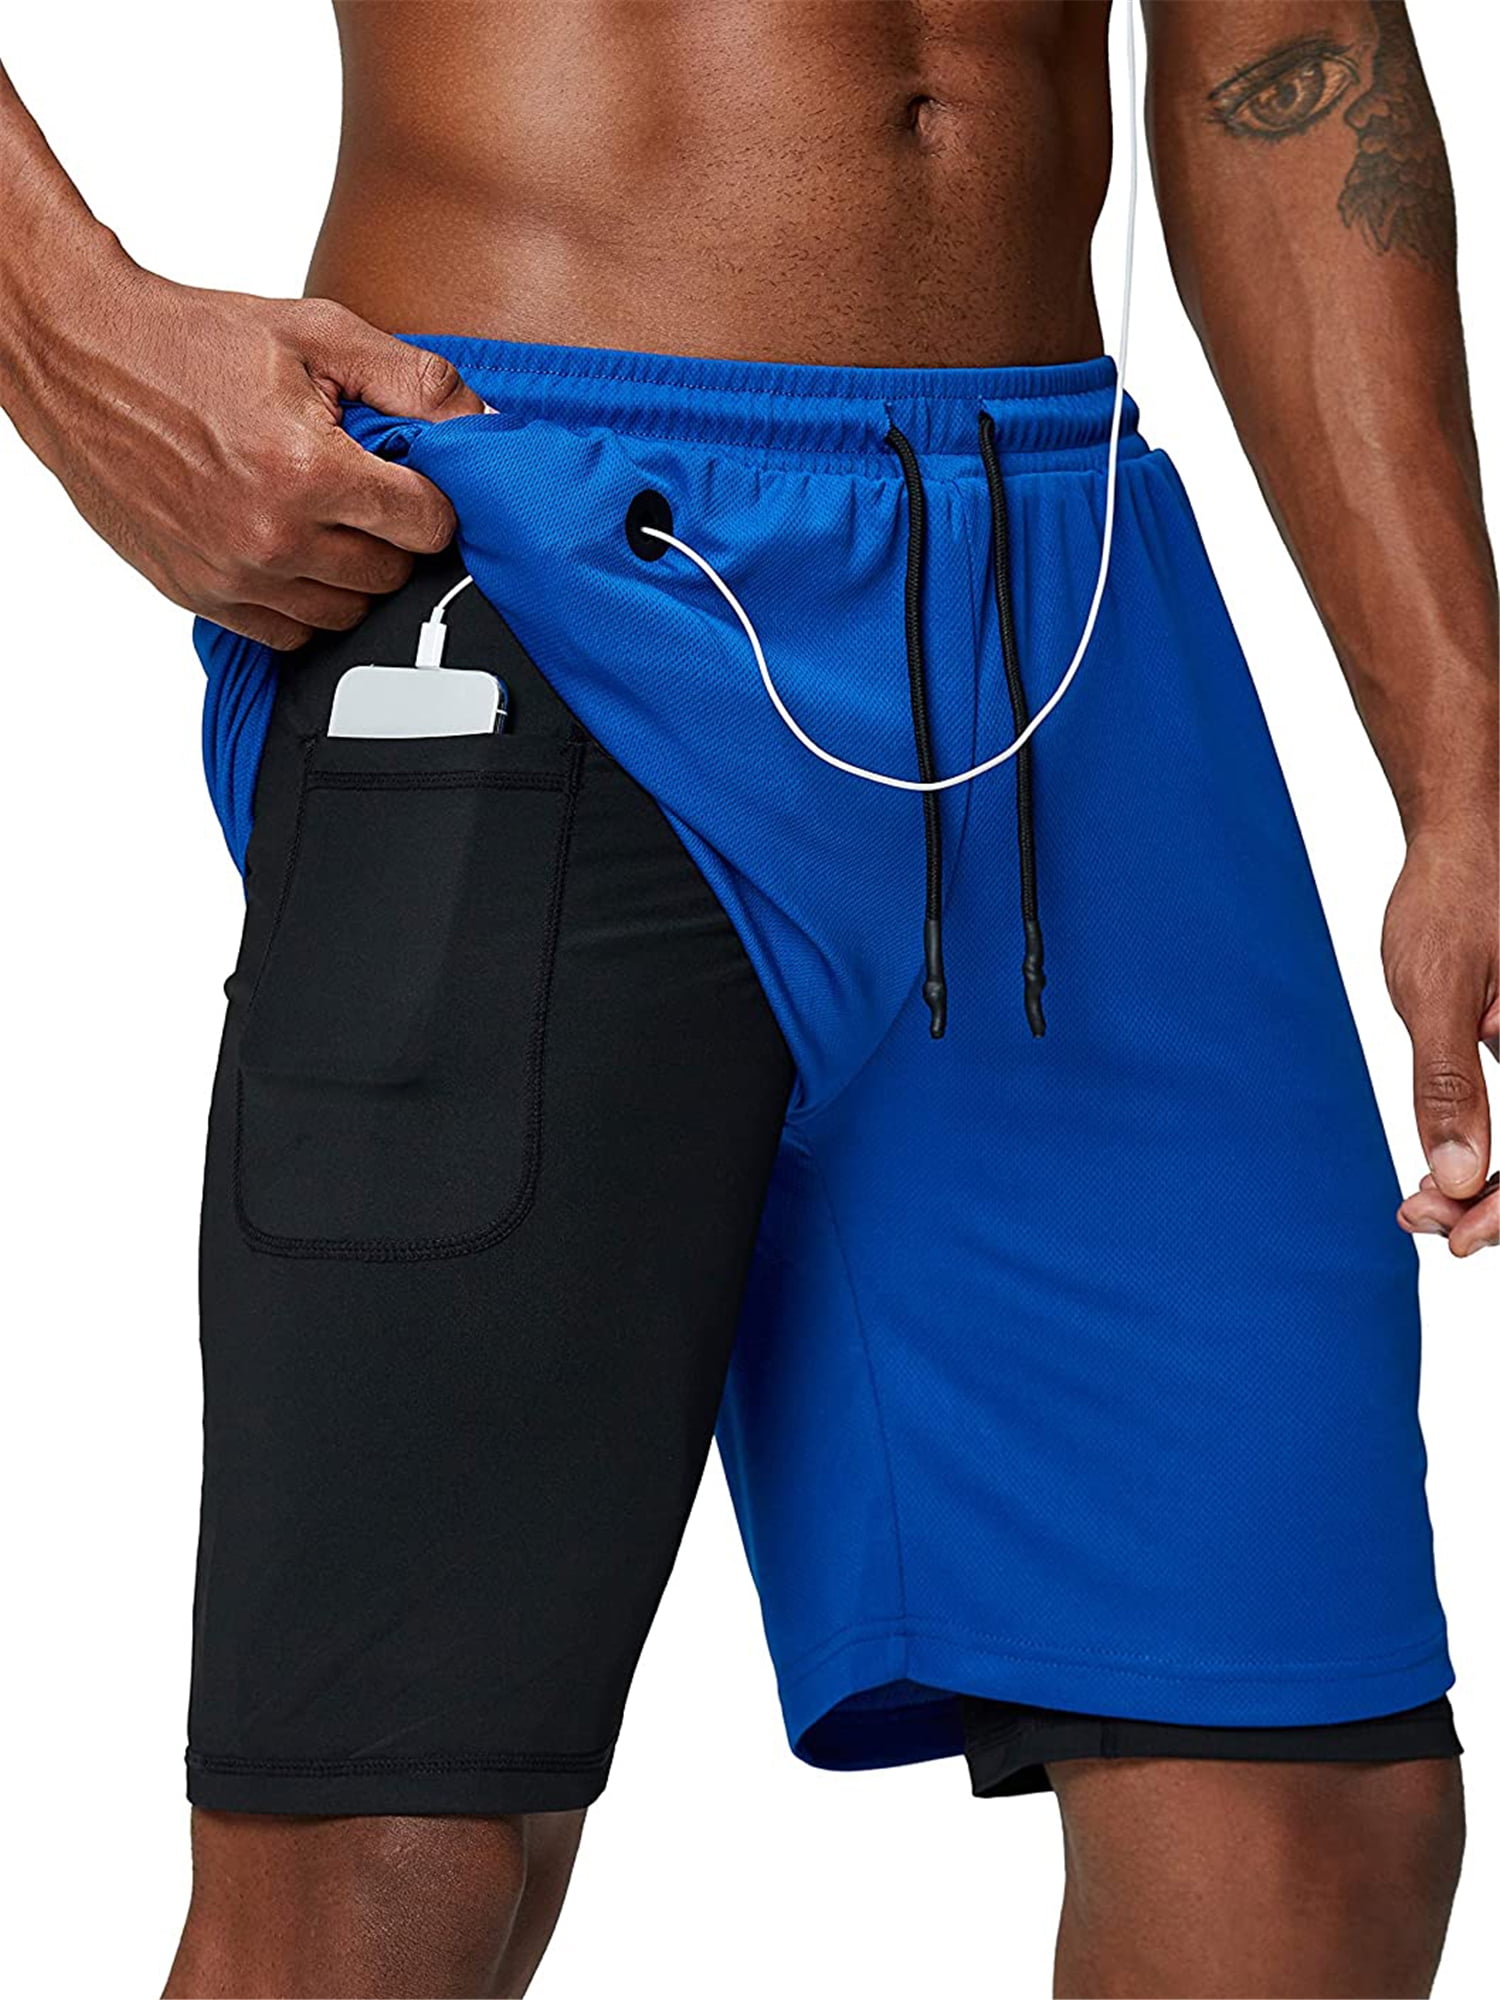 Aunavey Men S 2 In 1 Running Shorts Gym Workout Quick Dry Mens Shorts With Phone Pocket